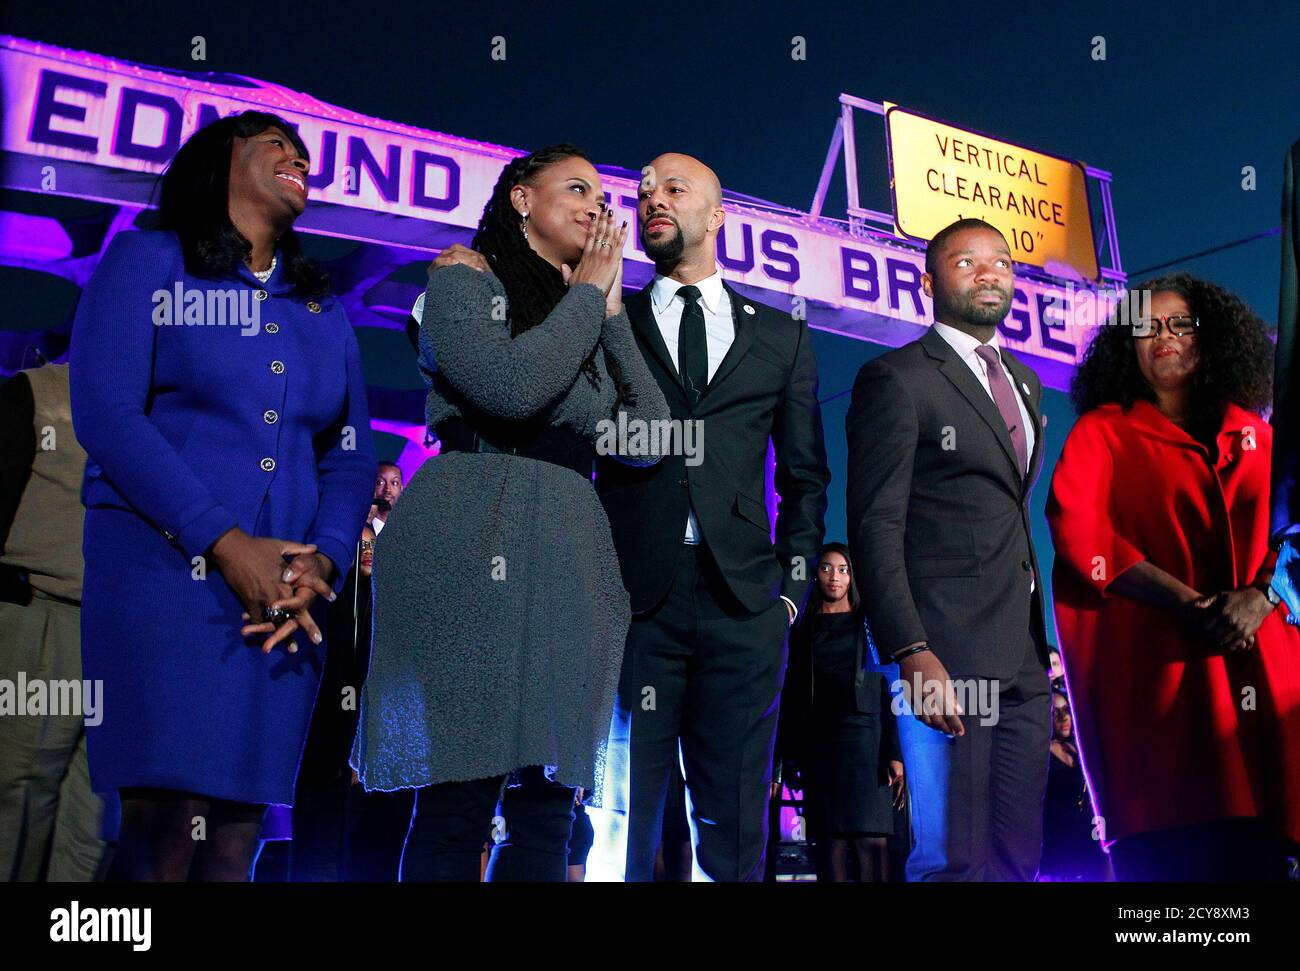 (L-R) Congresswoman Terri Sewell, director of the movie 'Selma' Ava DuVernay, cast members Common, David Oyelowo and producer Oprah Winfrey at the Edmund Pettus Bridge in Selma, Alabama January 18, 2015. Winfrey and other stars of the Oscar-nominated movie 'Selma' marched with thousands of people in the Alabama city on Sunday afternoon in honor of Martin Luther King Jr.'s birthday.   REUTERS/Tami Chappell  (UNITED STATES - Tags: ENTERTAINMENT ANNIVERSARY POLITICS) Stock Photo